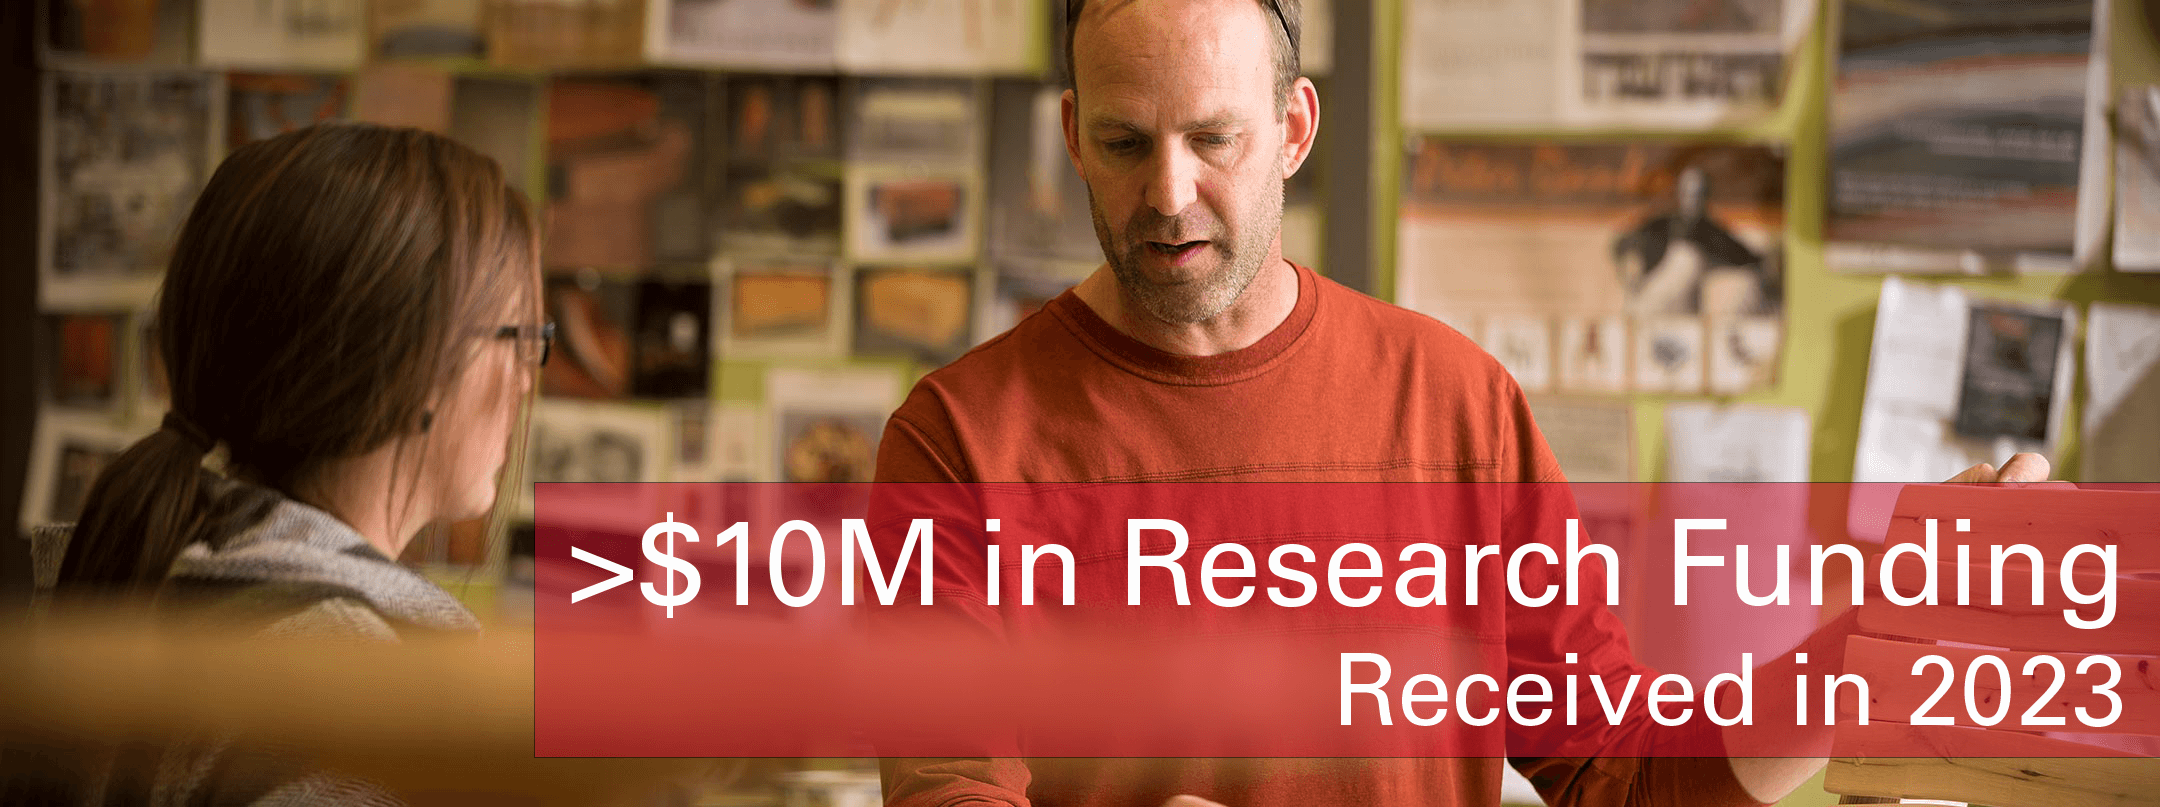 Over $2,000,000 in research funding received in 2023